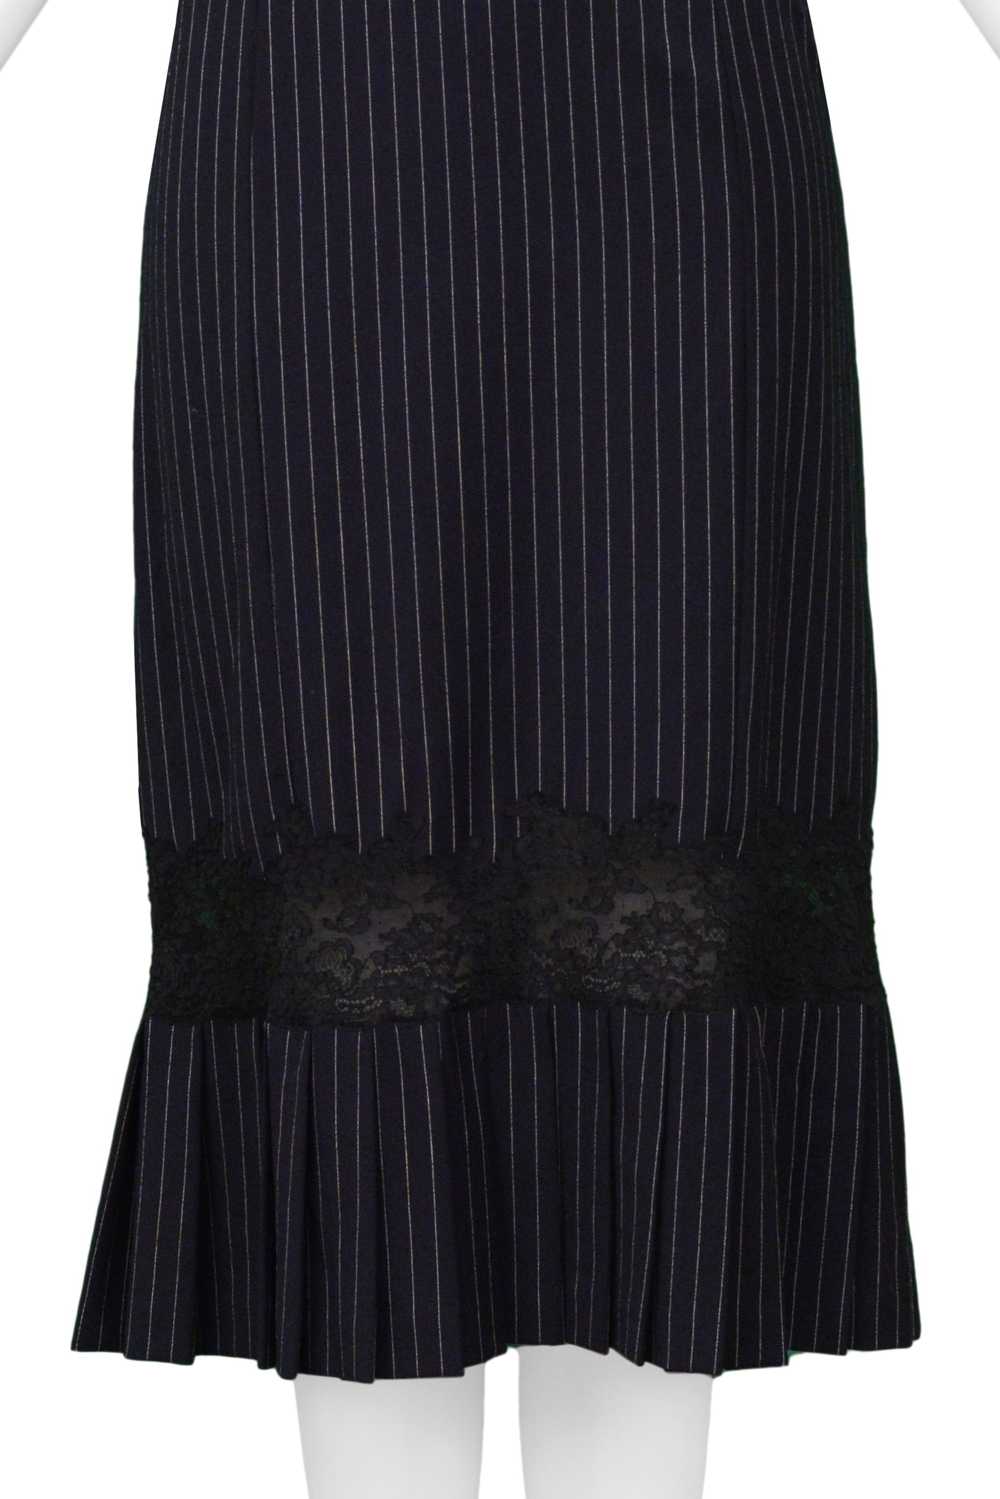 JOHN GALLIANO NAVY PINSTRIPE DRESS WITH LACE INSET - image 3